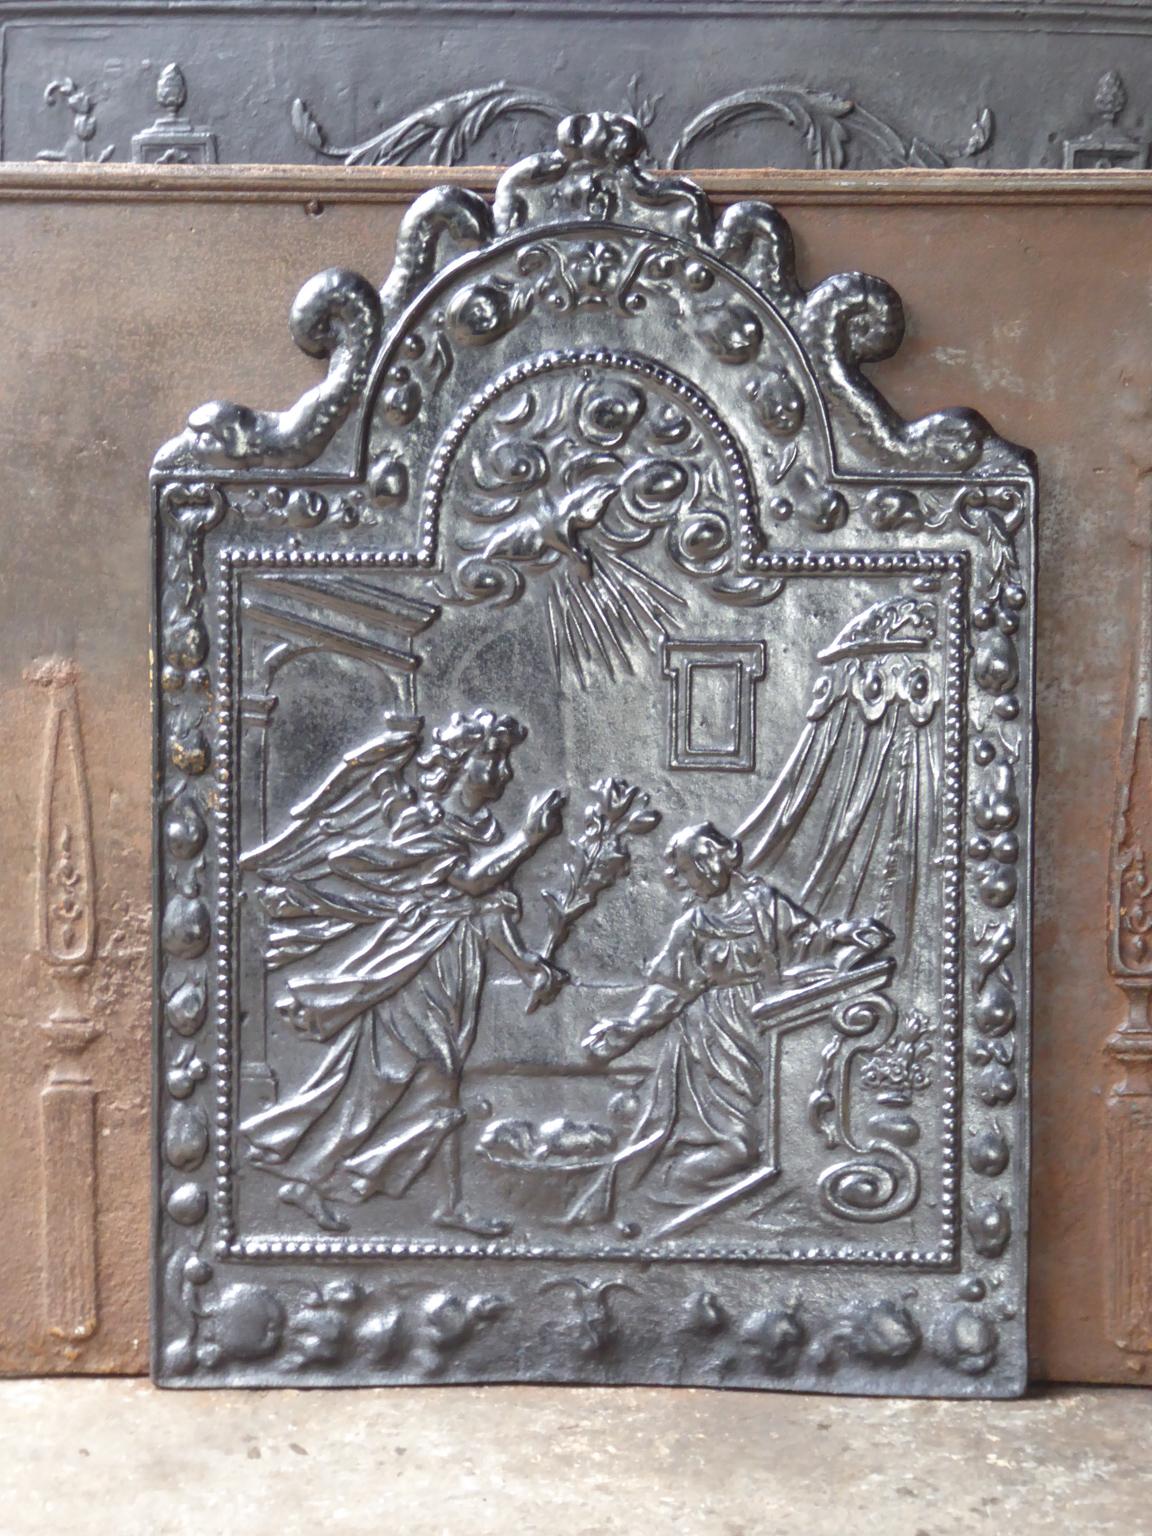 Beautiful, 17th century, French fireback with the annunciation to Mary. The style of the fireback is Renaissance and it is from that period. 

The fireback is made of cast iron and has a black / pewter patina. The condition is good, no cracks.